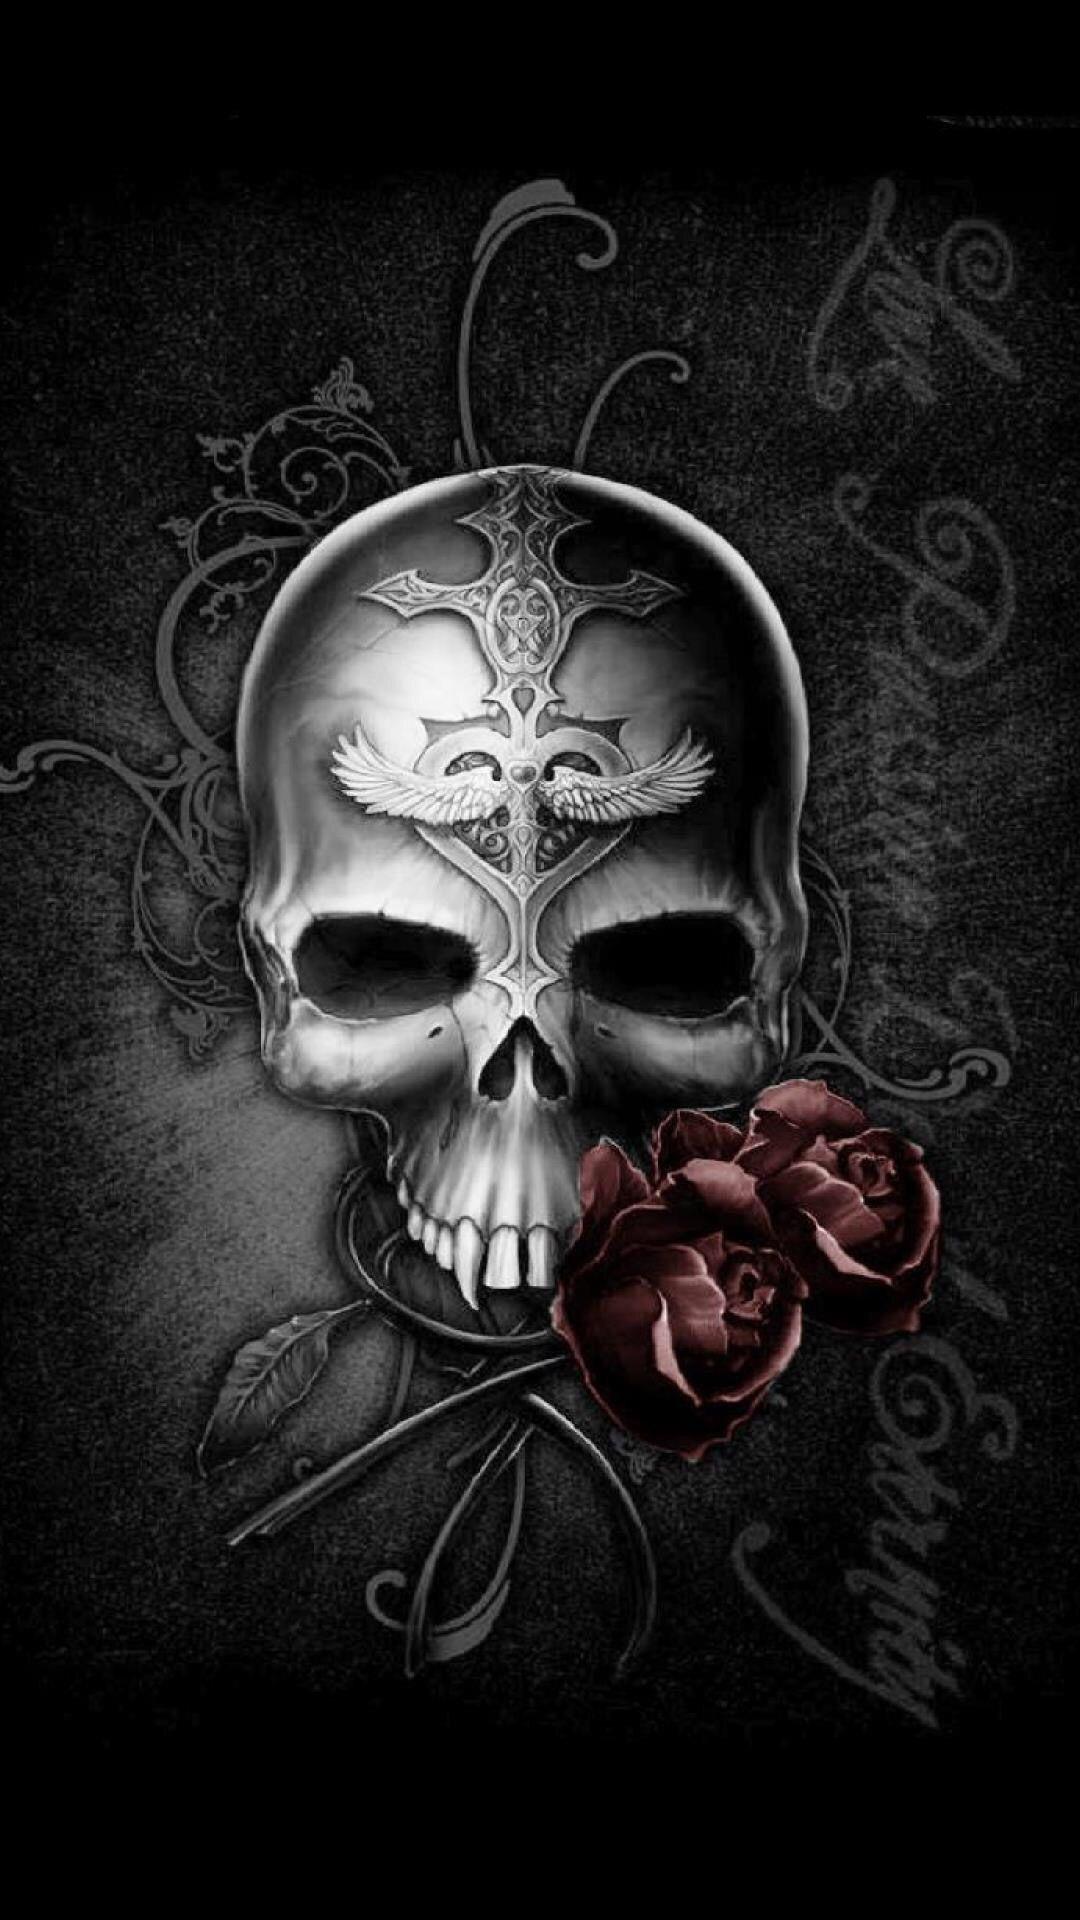 Badass Wallpaper For Android 03 0f 40 Dark Skull and Rose